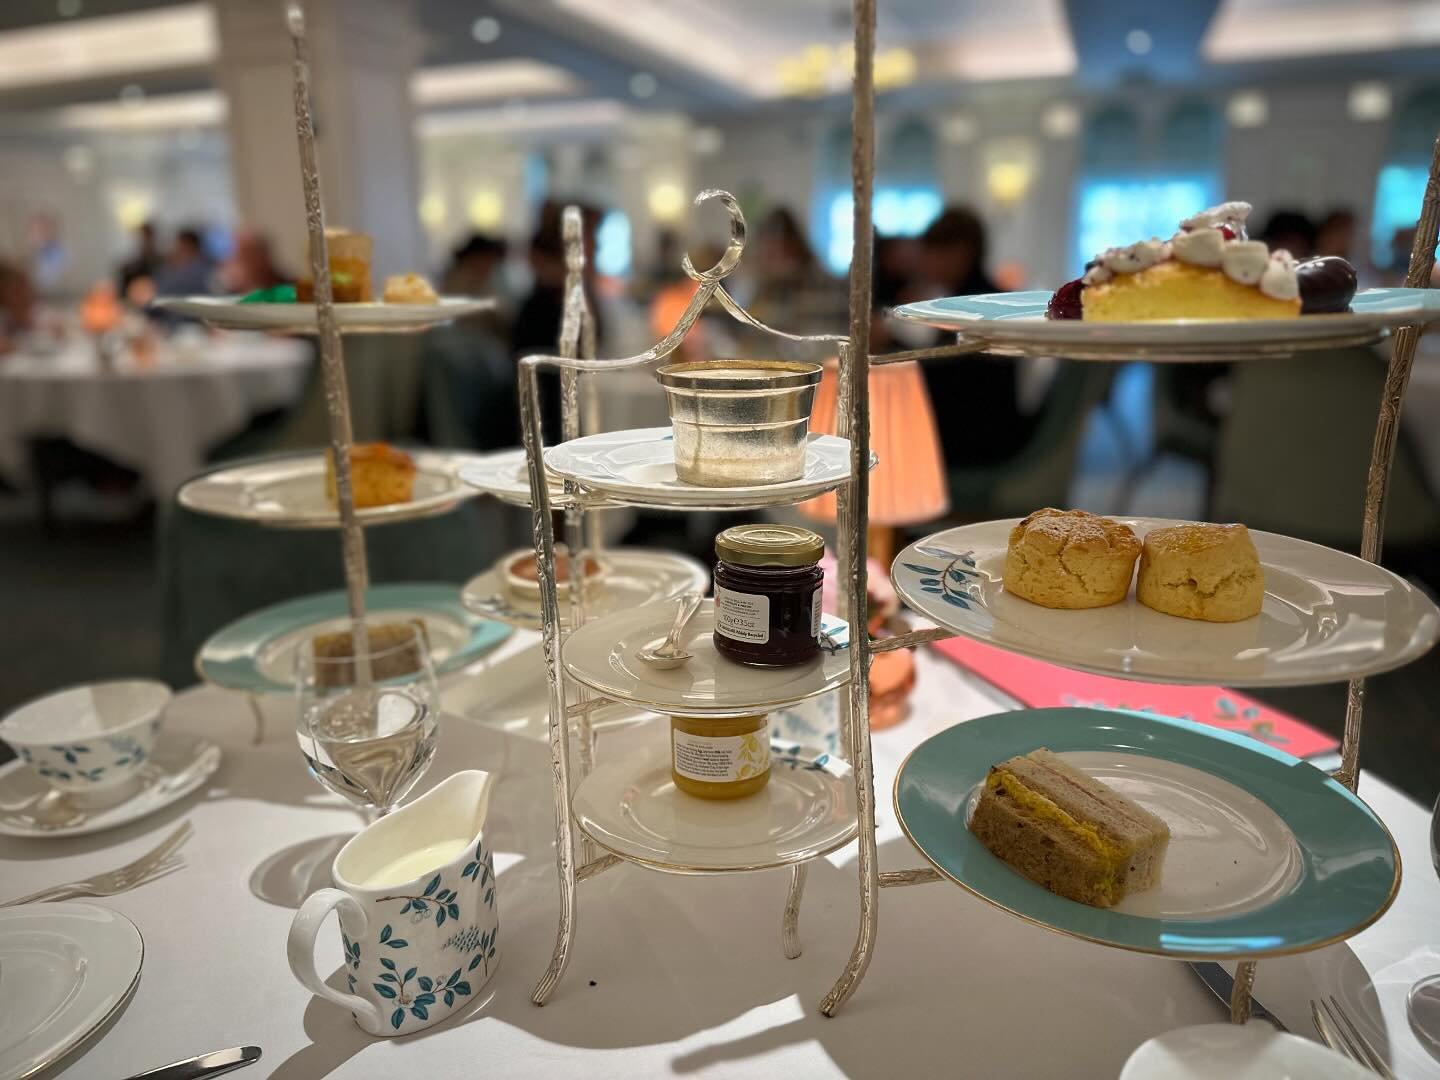 Yes, it&rsquo;s a bit &lsquo;posh&rsquo;, but on a rainy day in London, a spot of tea hit just the right note. @fortnums #hightea